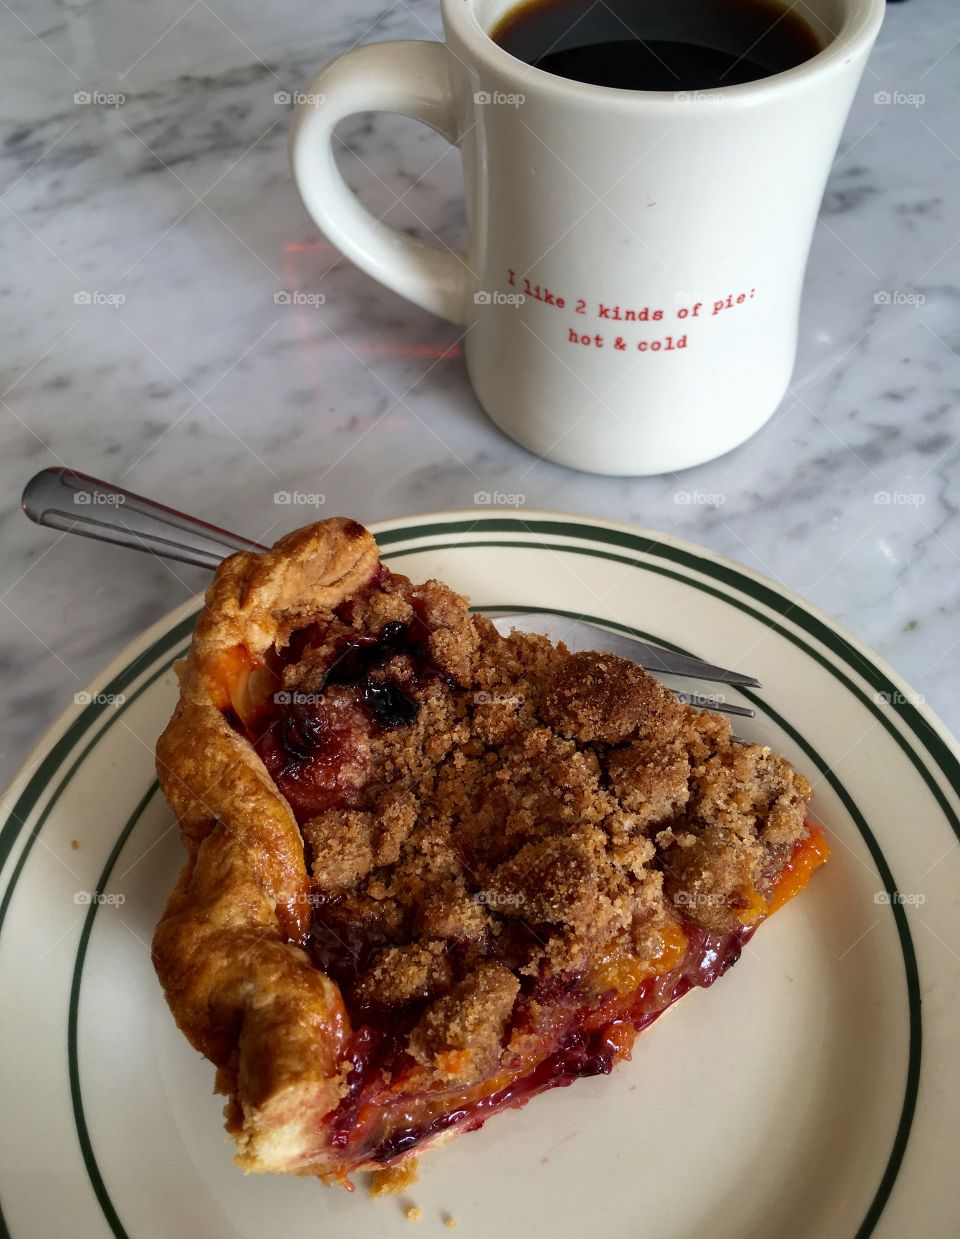 A slice of american pie with a cup of coffee.